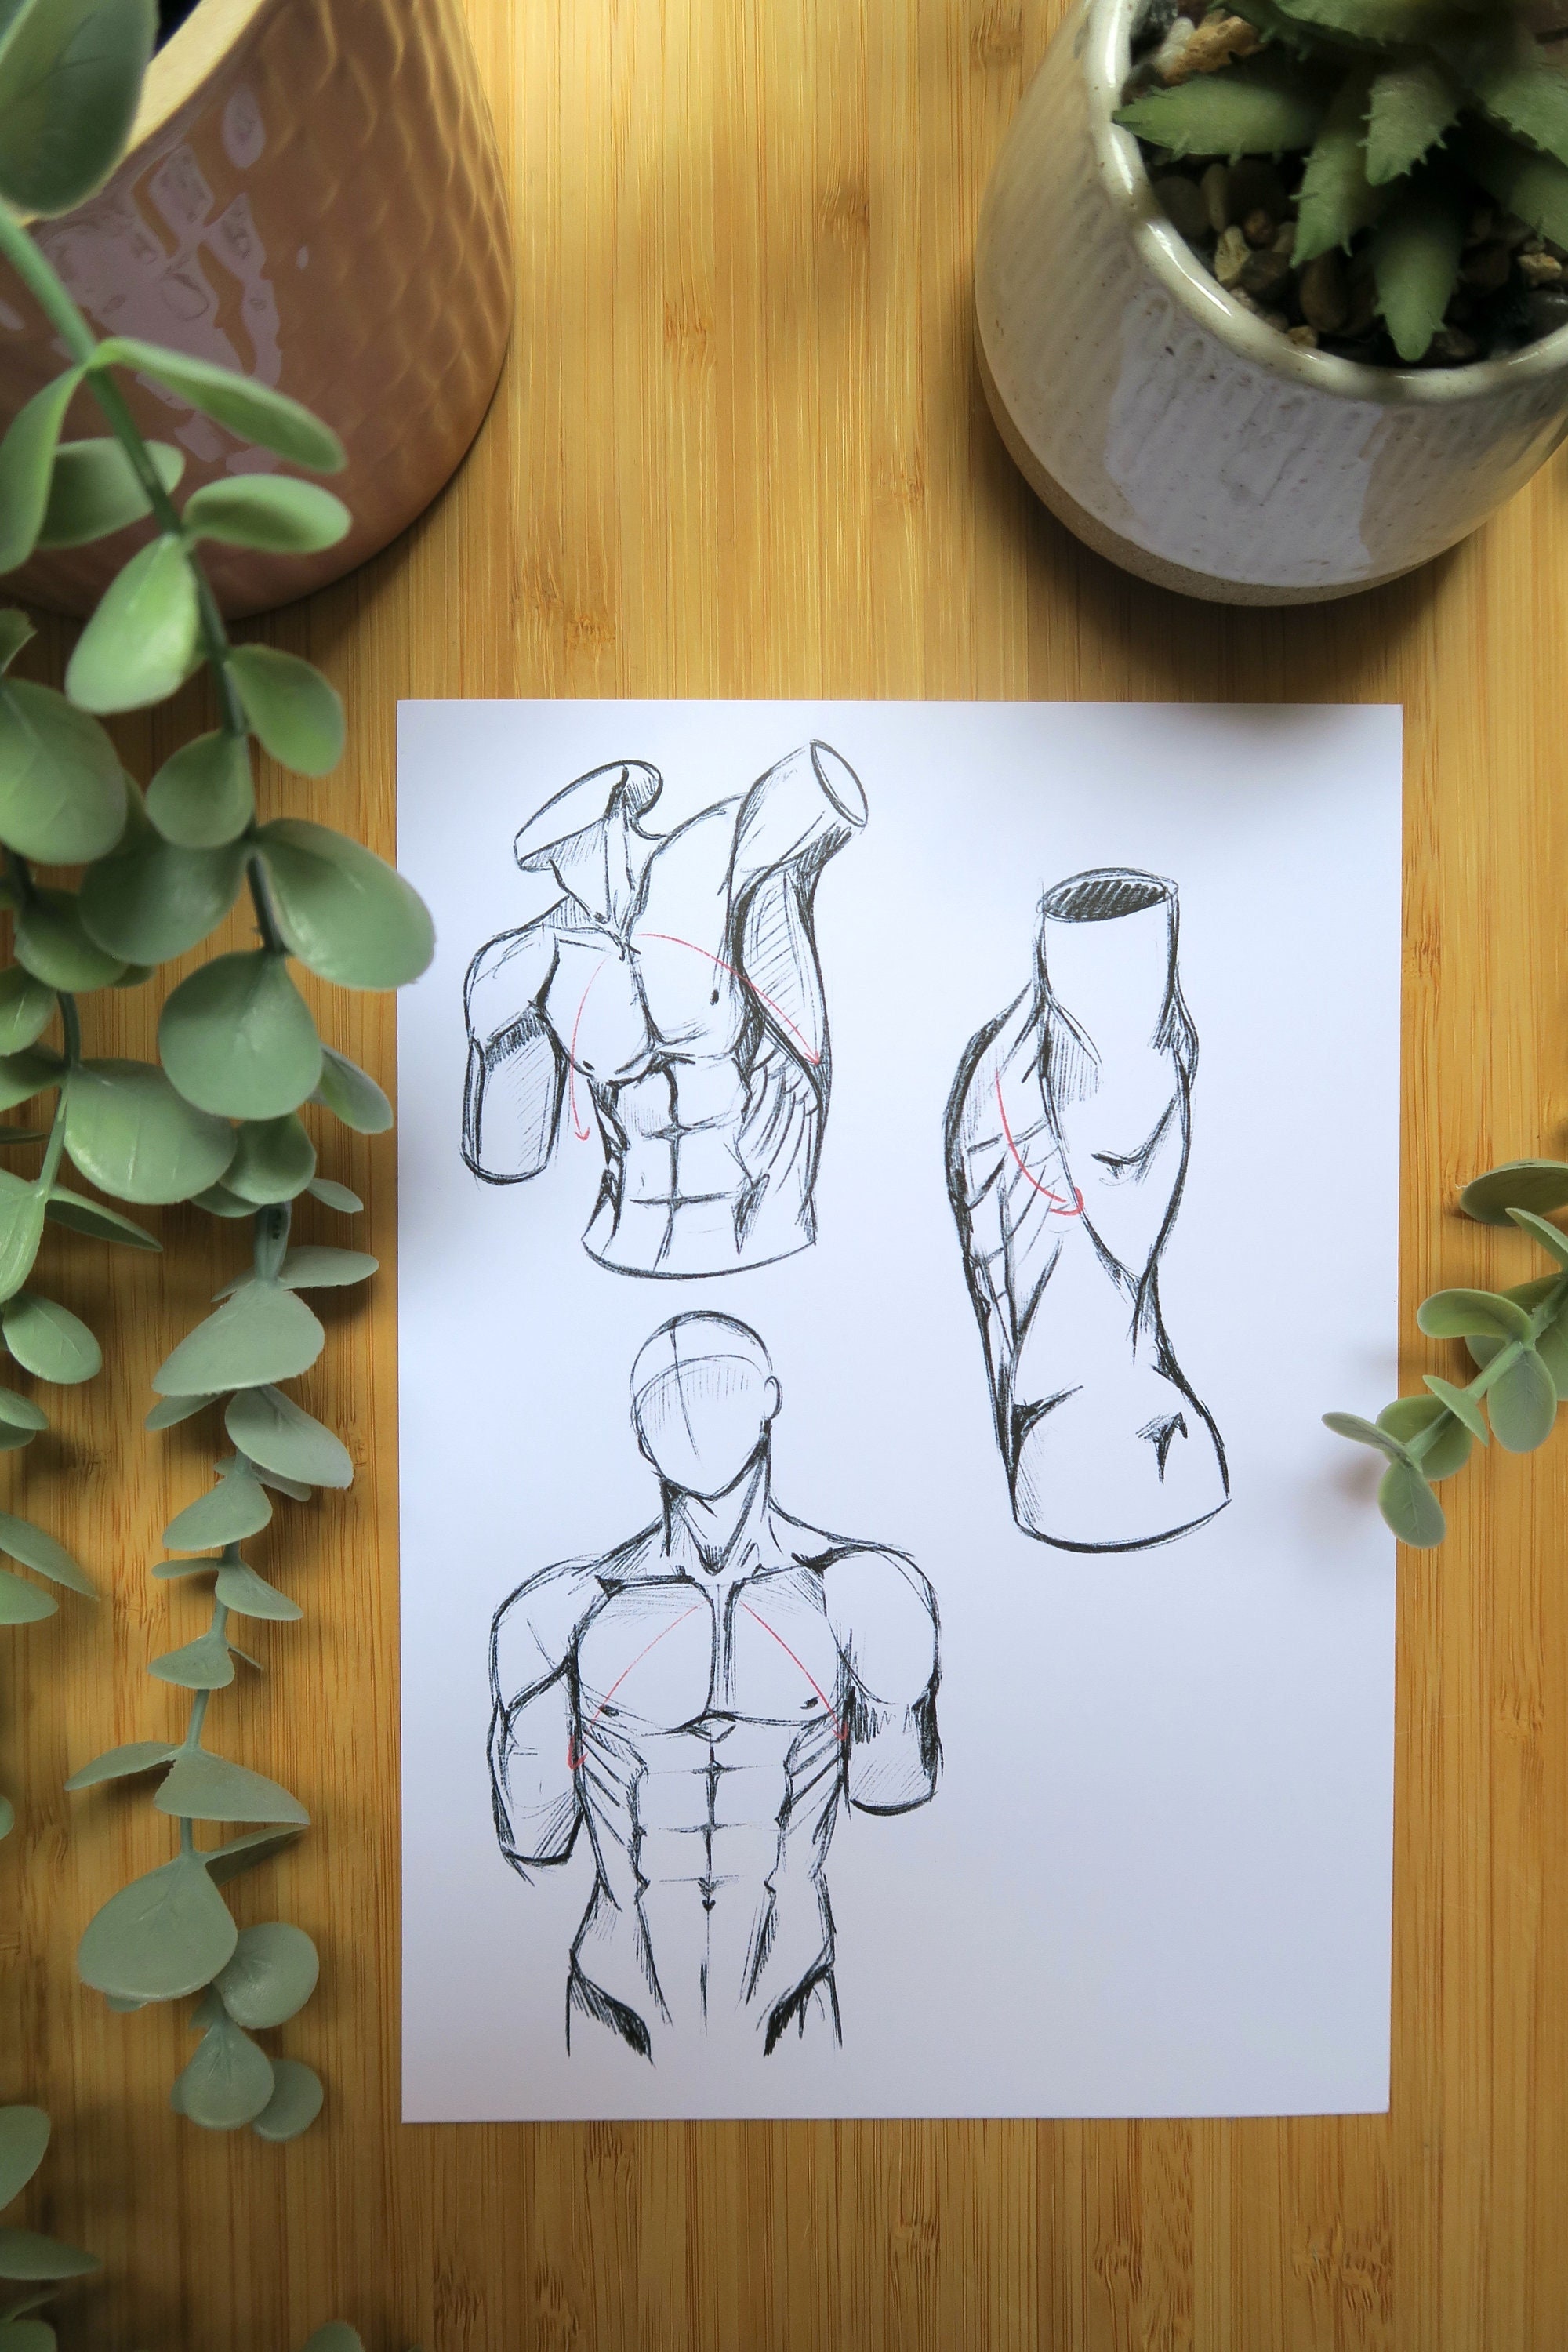 learning to draw male anatomy, what do you guys think? : r/learntodraw